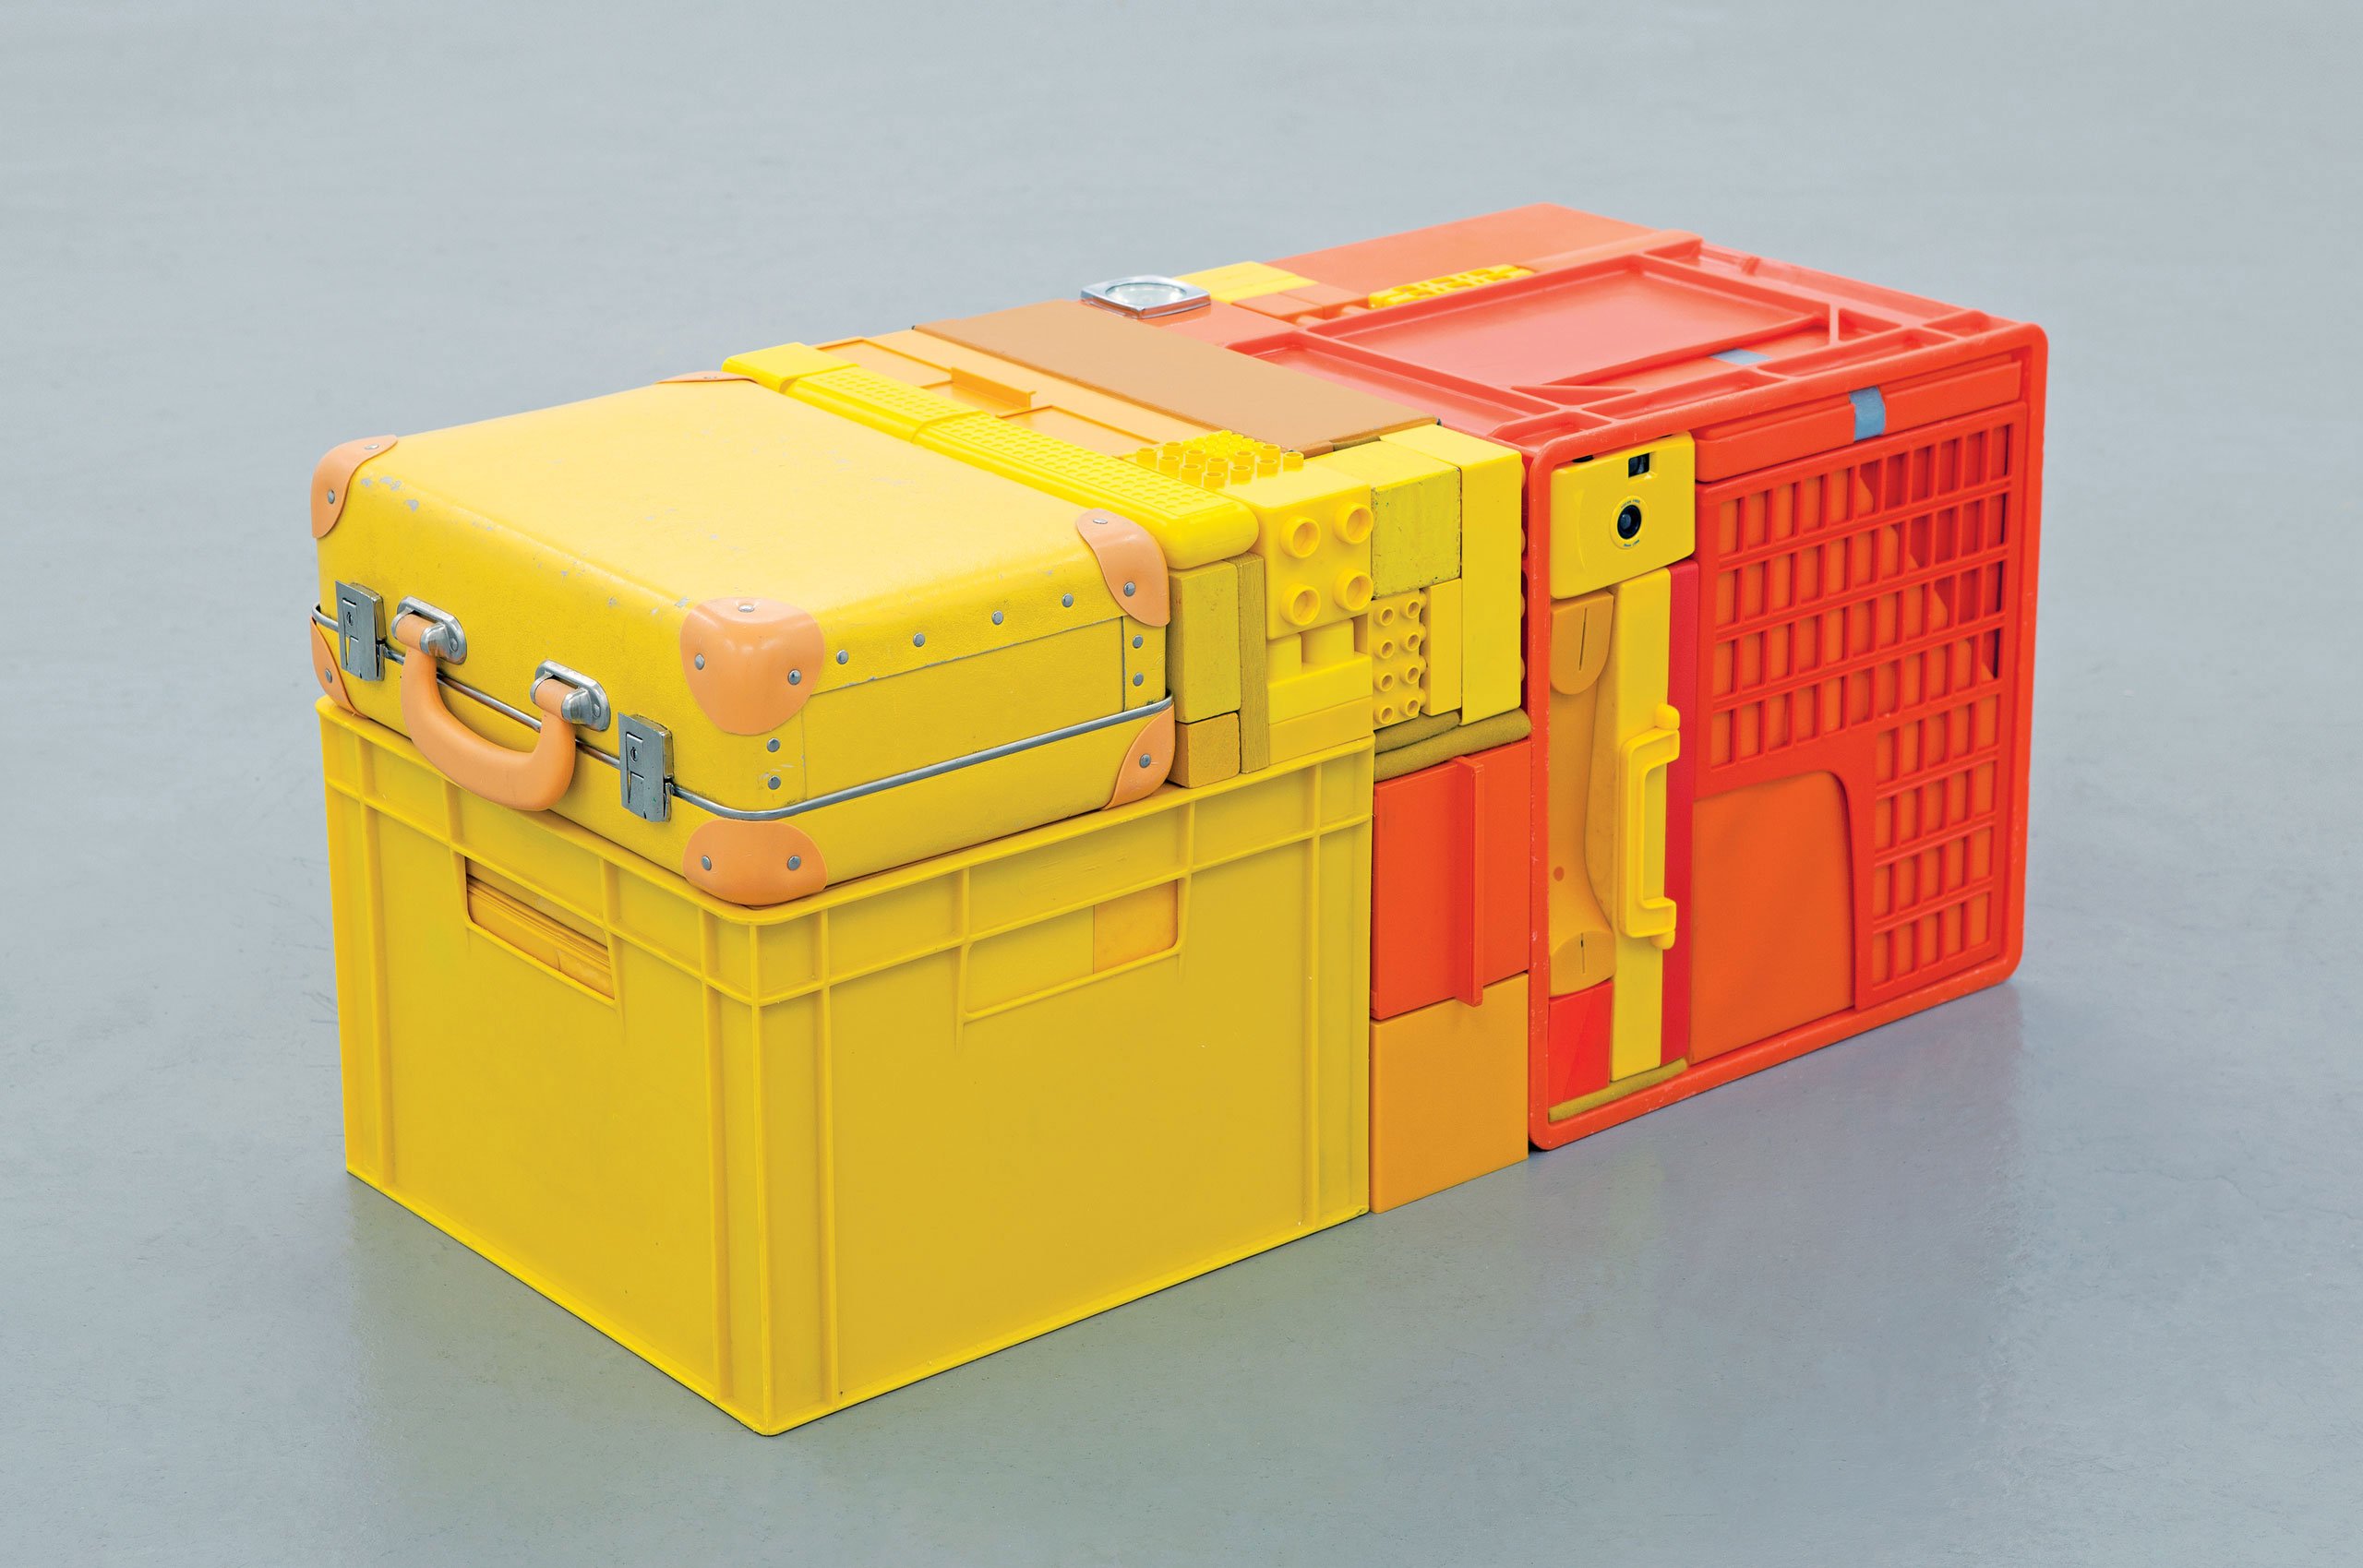 TUBE by Michael Johansson 2013, 36 × 36 × 81 cm Yellow and orange bags, boxes, and ordinary items. Courtesy of Tom Buchanan and 8 Books.